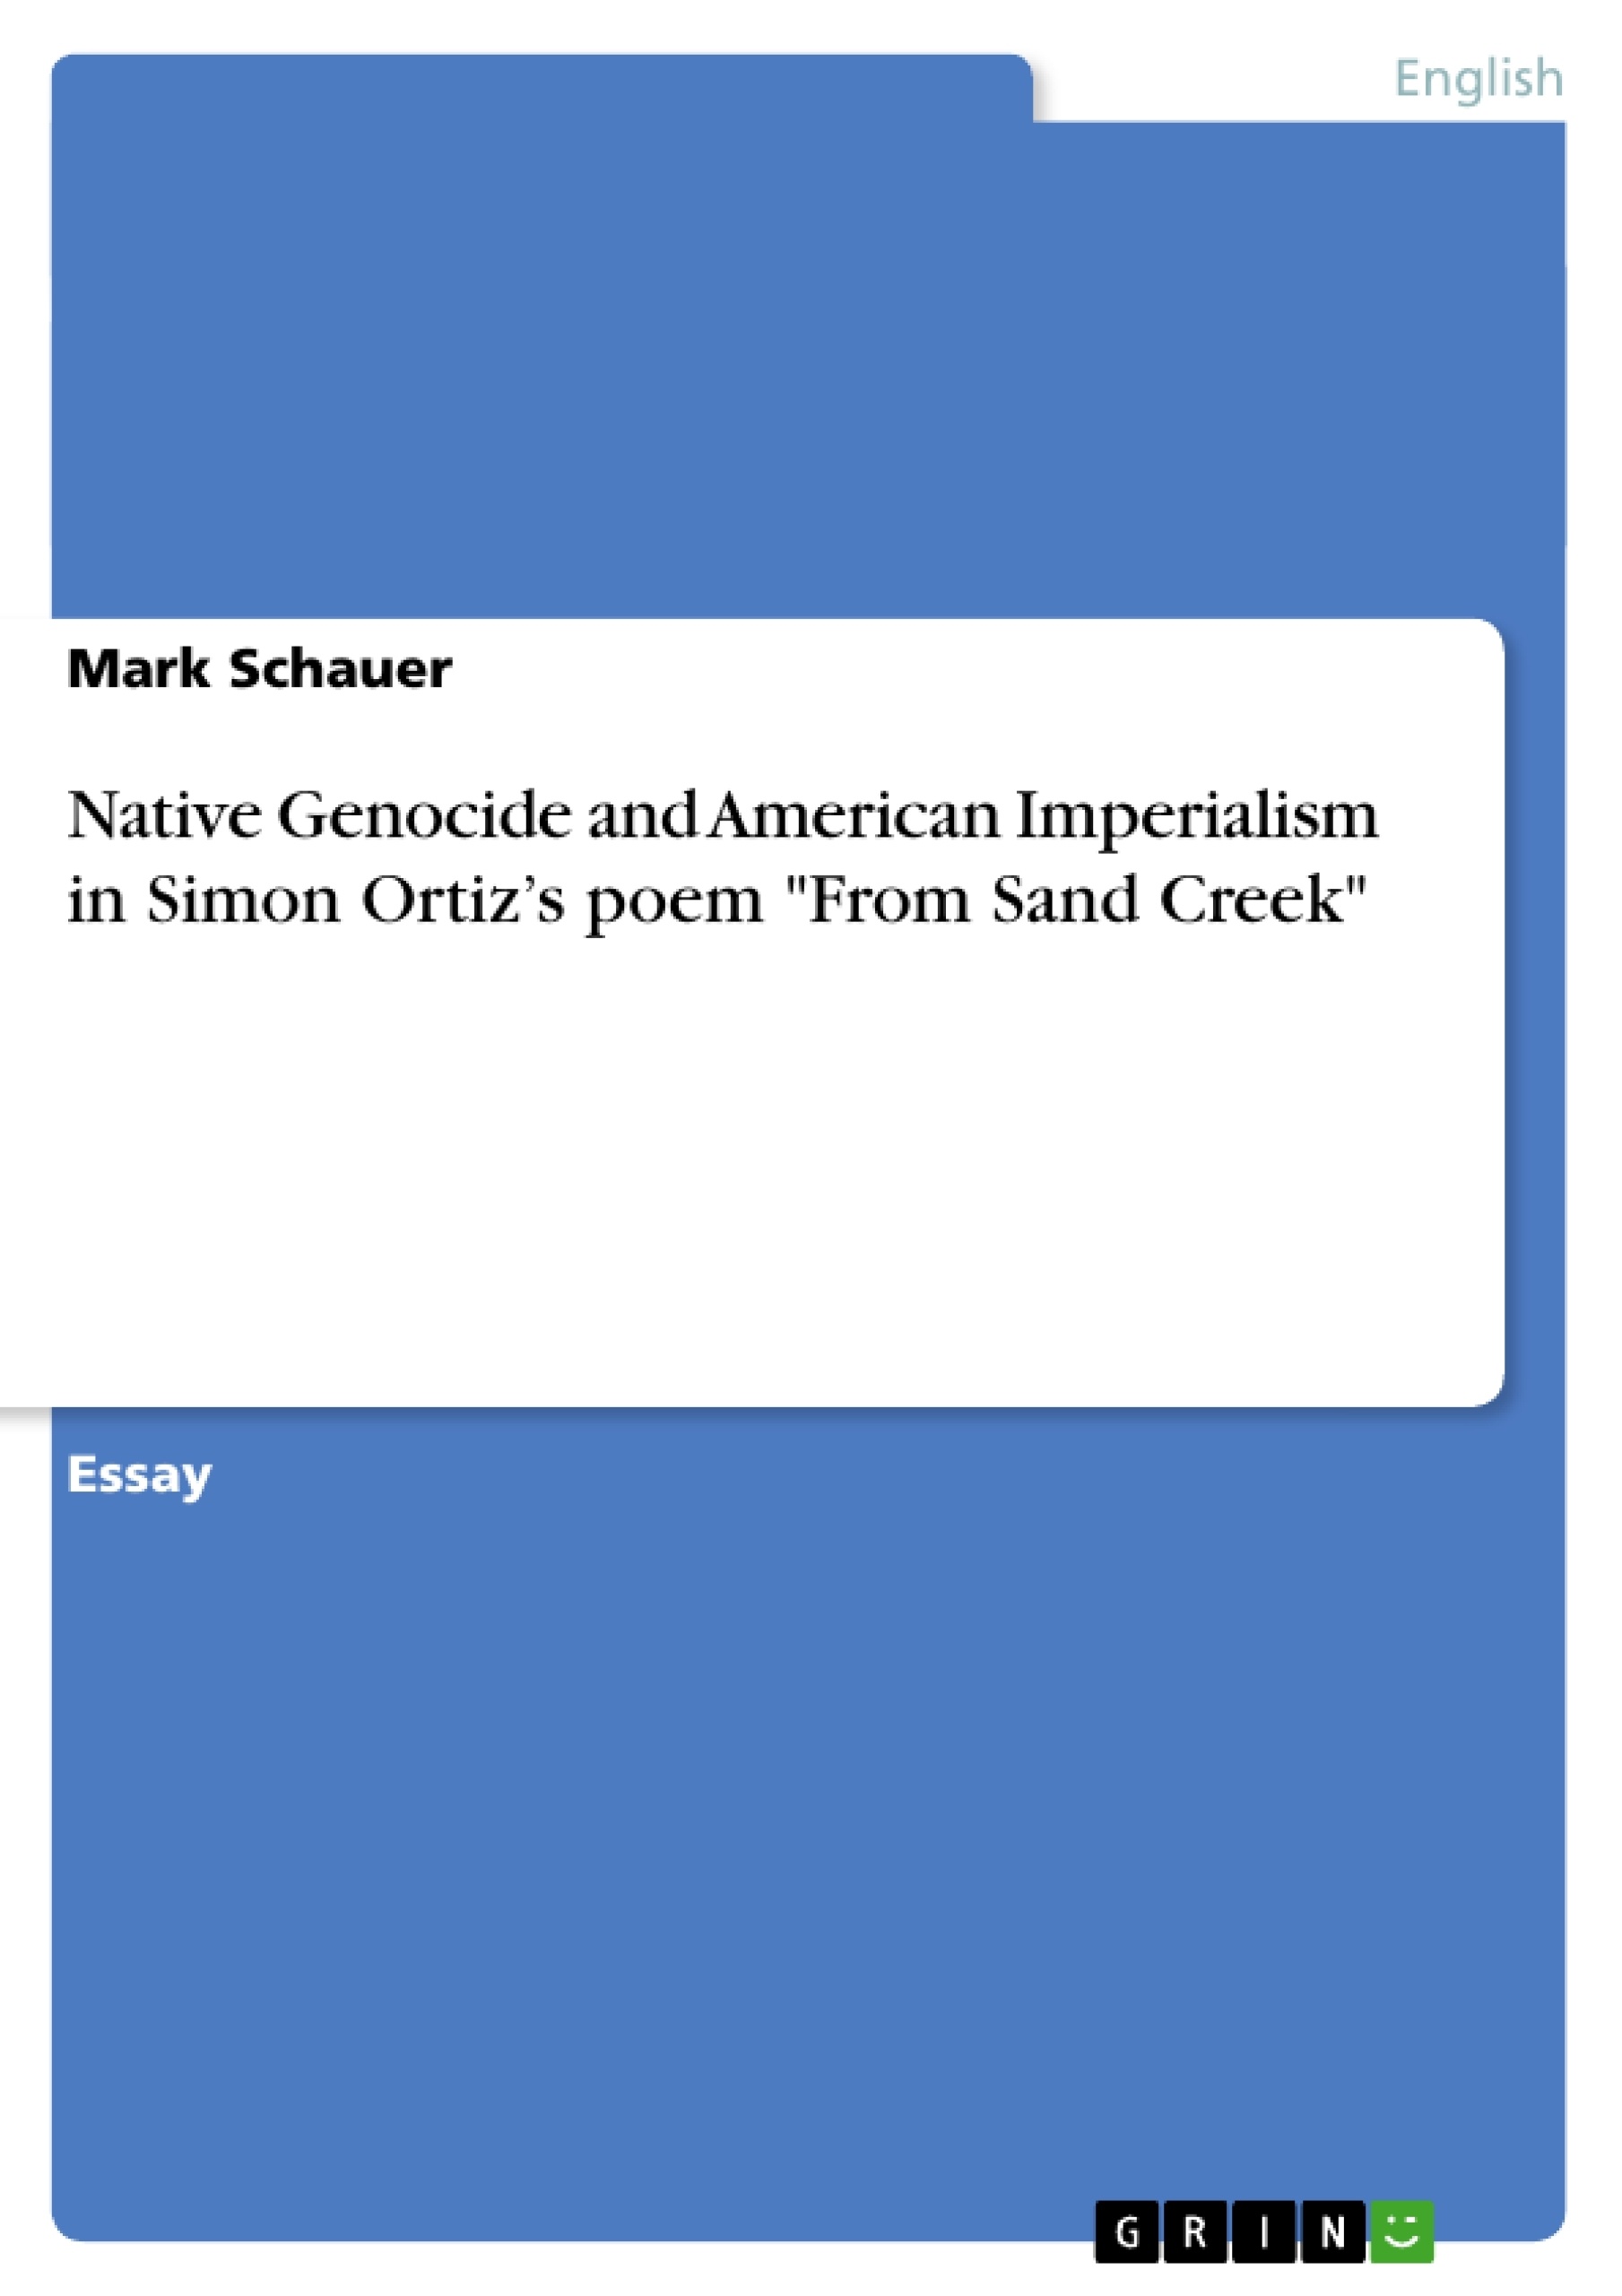 Titel: Native Genocide and American Imperialism in Simon Ortiz’s poem "From Sand Creek"